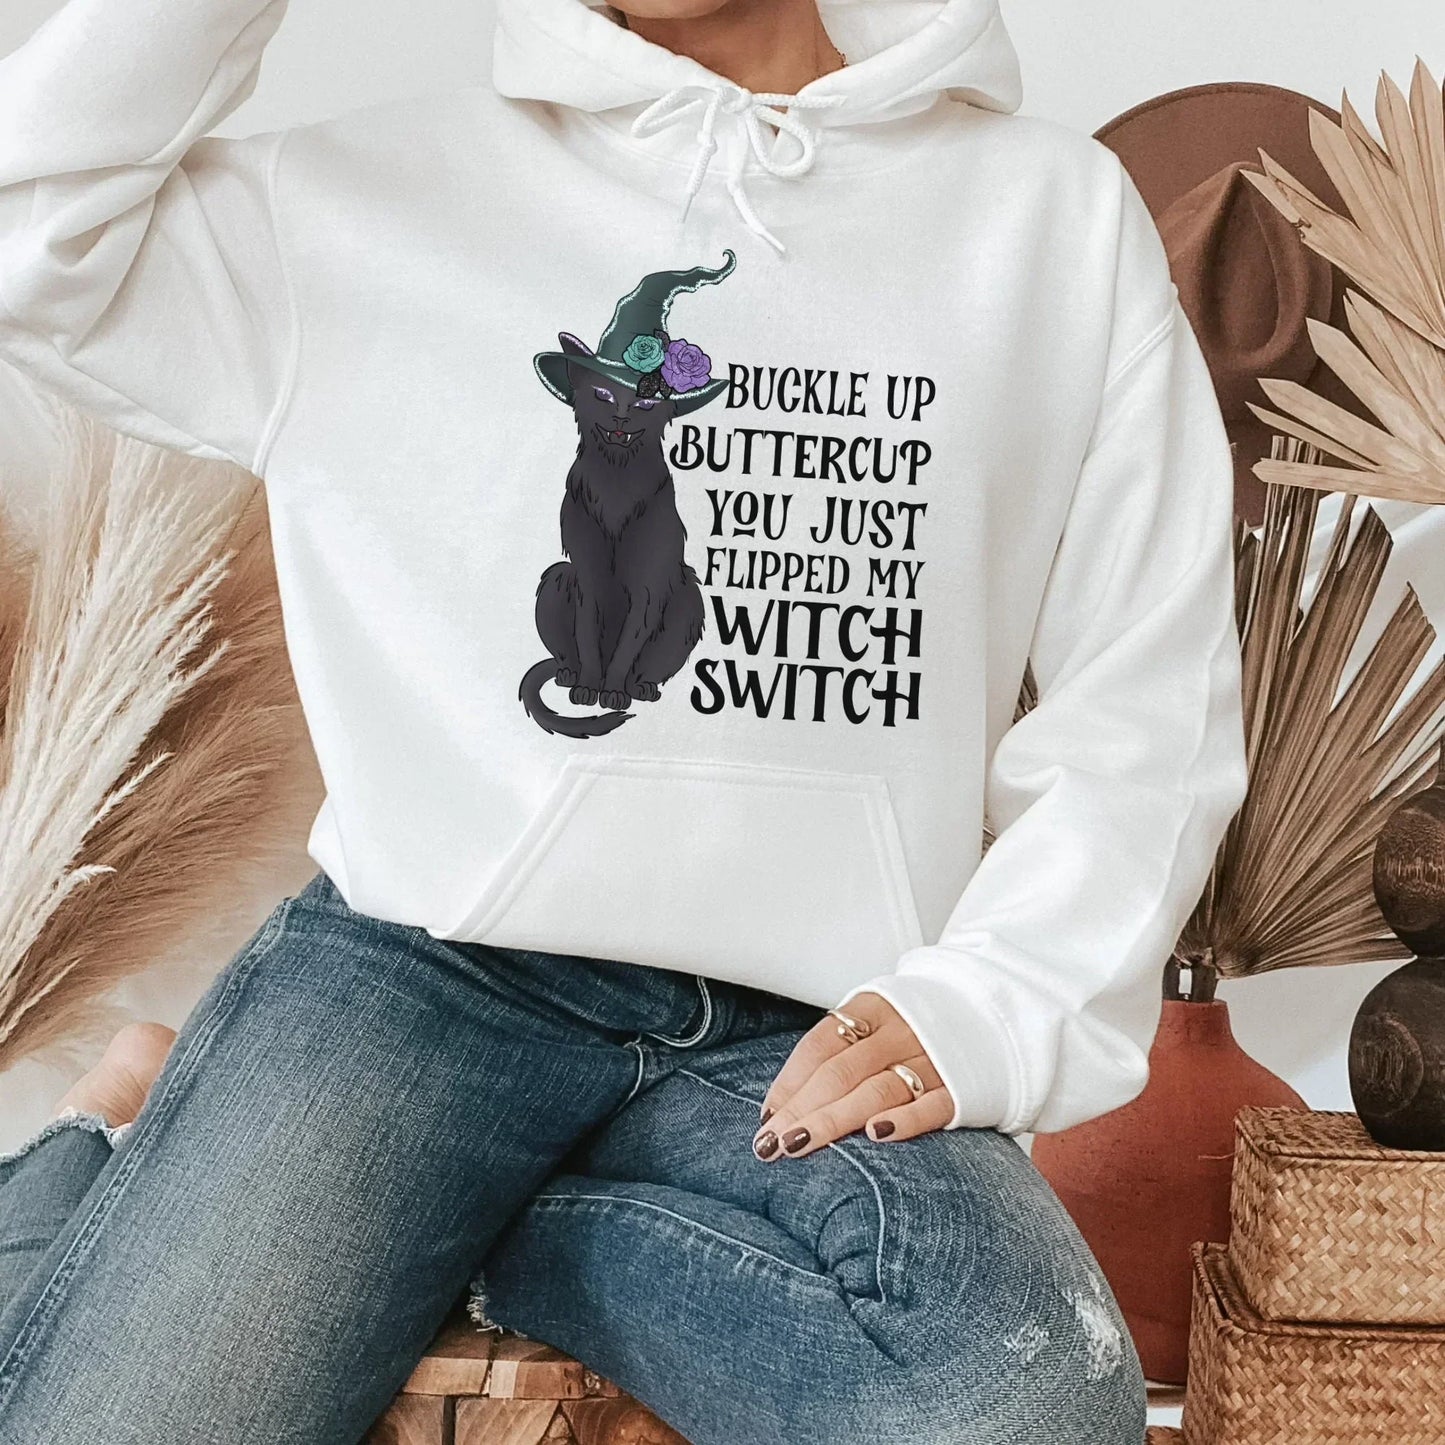 Funny Halloween Shirt, Black Cat Shirt, Gothic Shirt, Witchy Vibes, Pastel Halloween Sweatshirt, Magical Witch Hat Cat Shirt, Goth Style